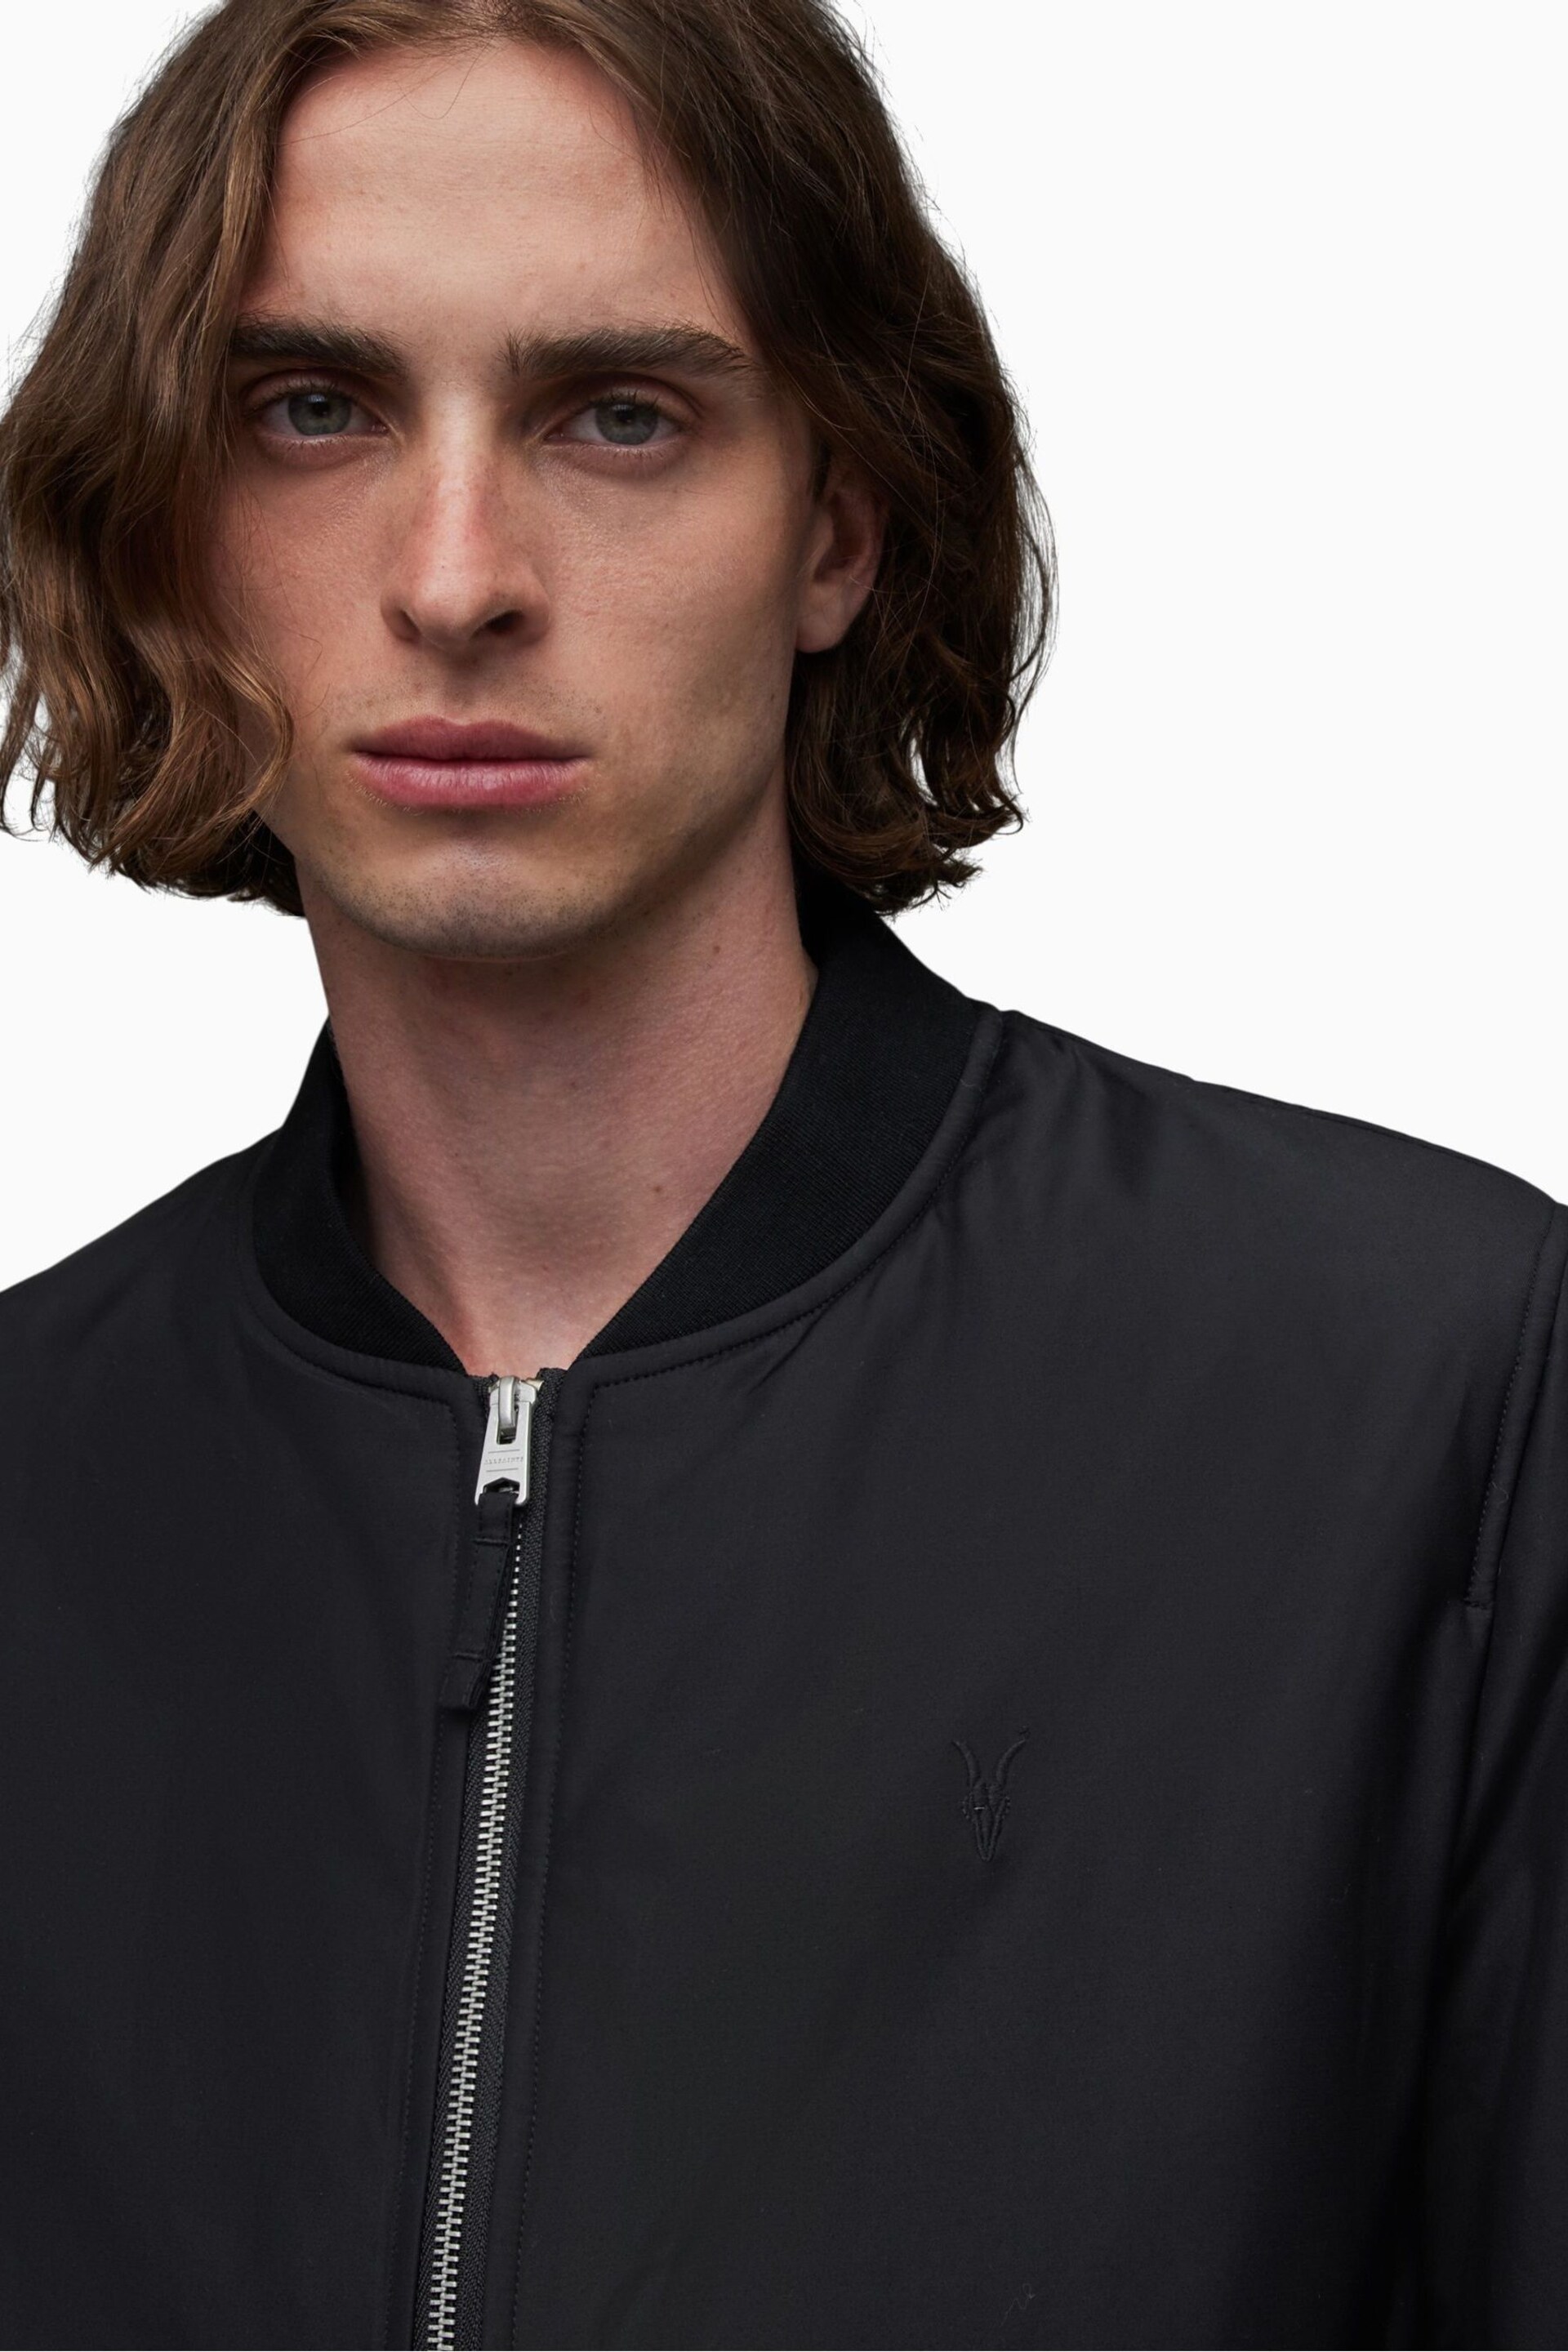 AllSaints Black Withrow Bomber Jacket - Image 5 of 7